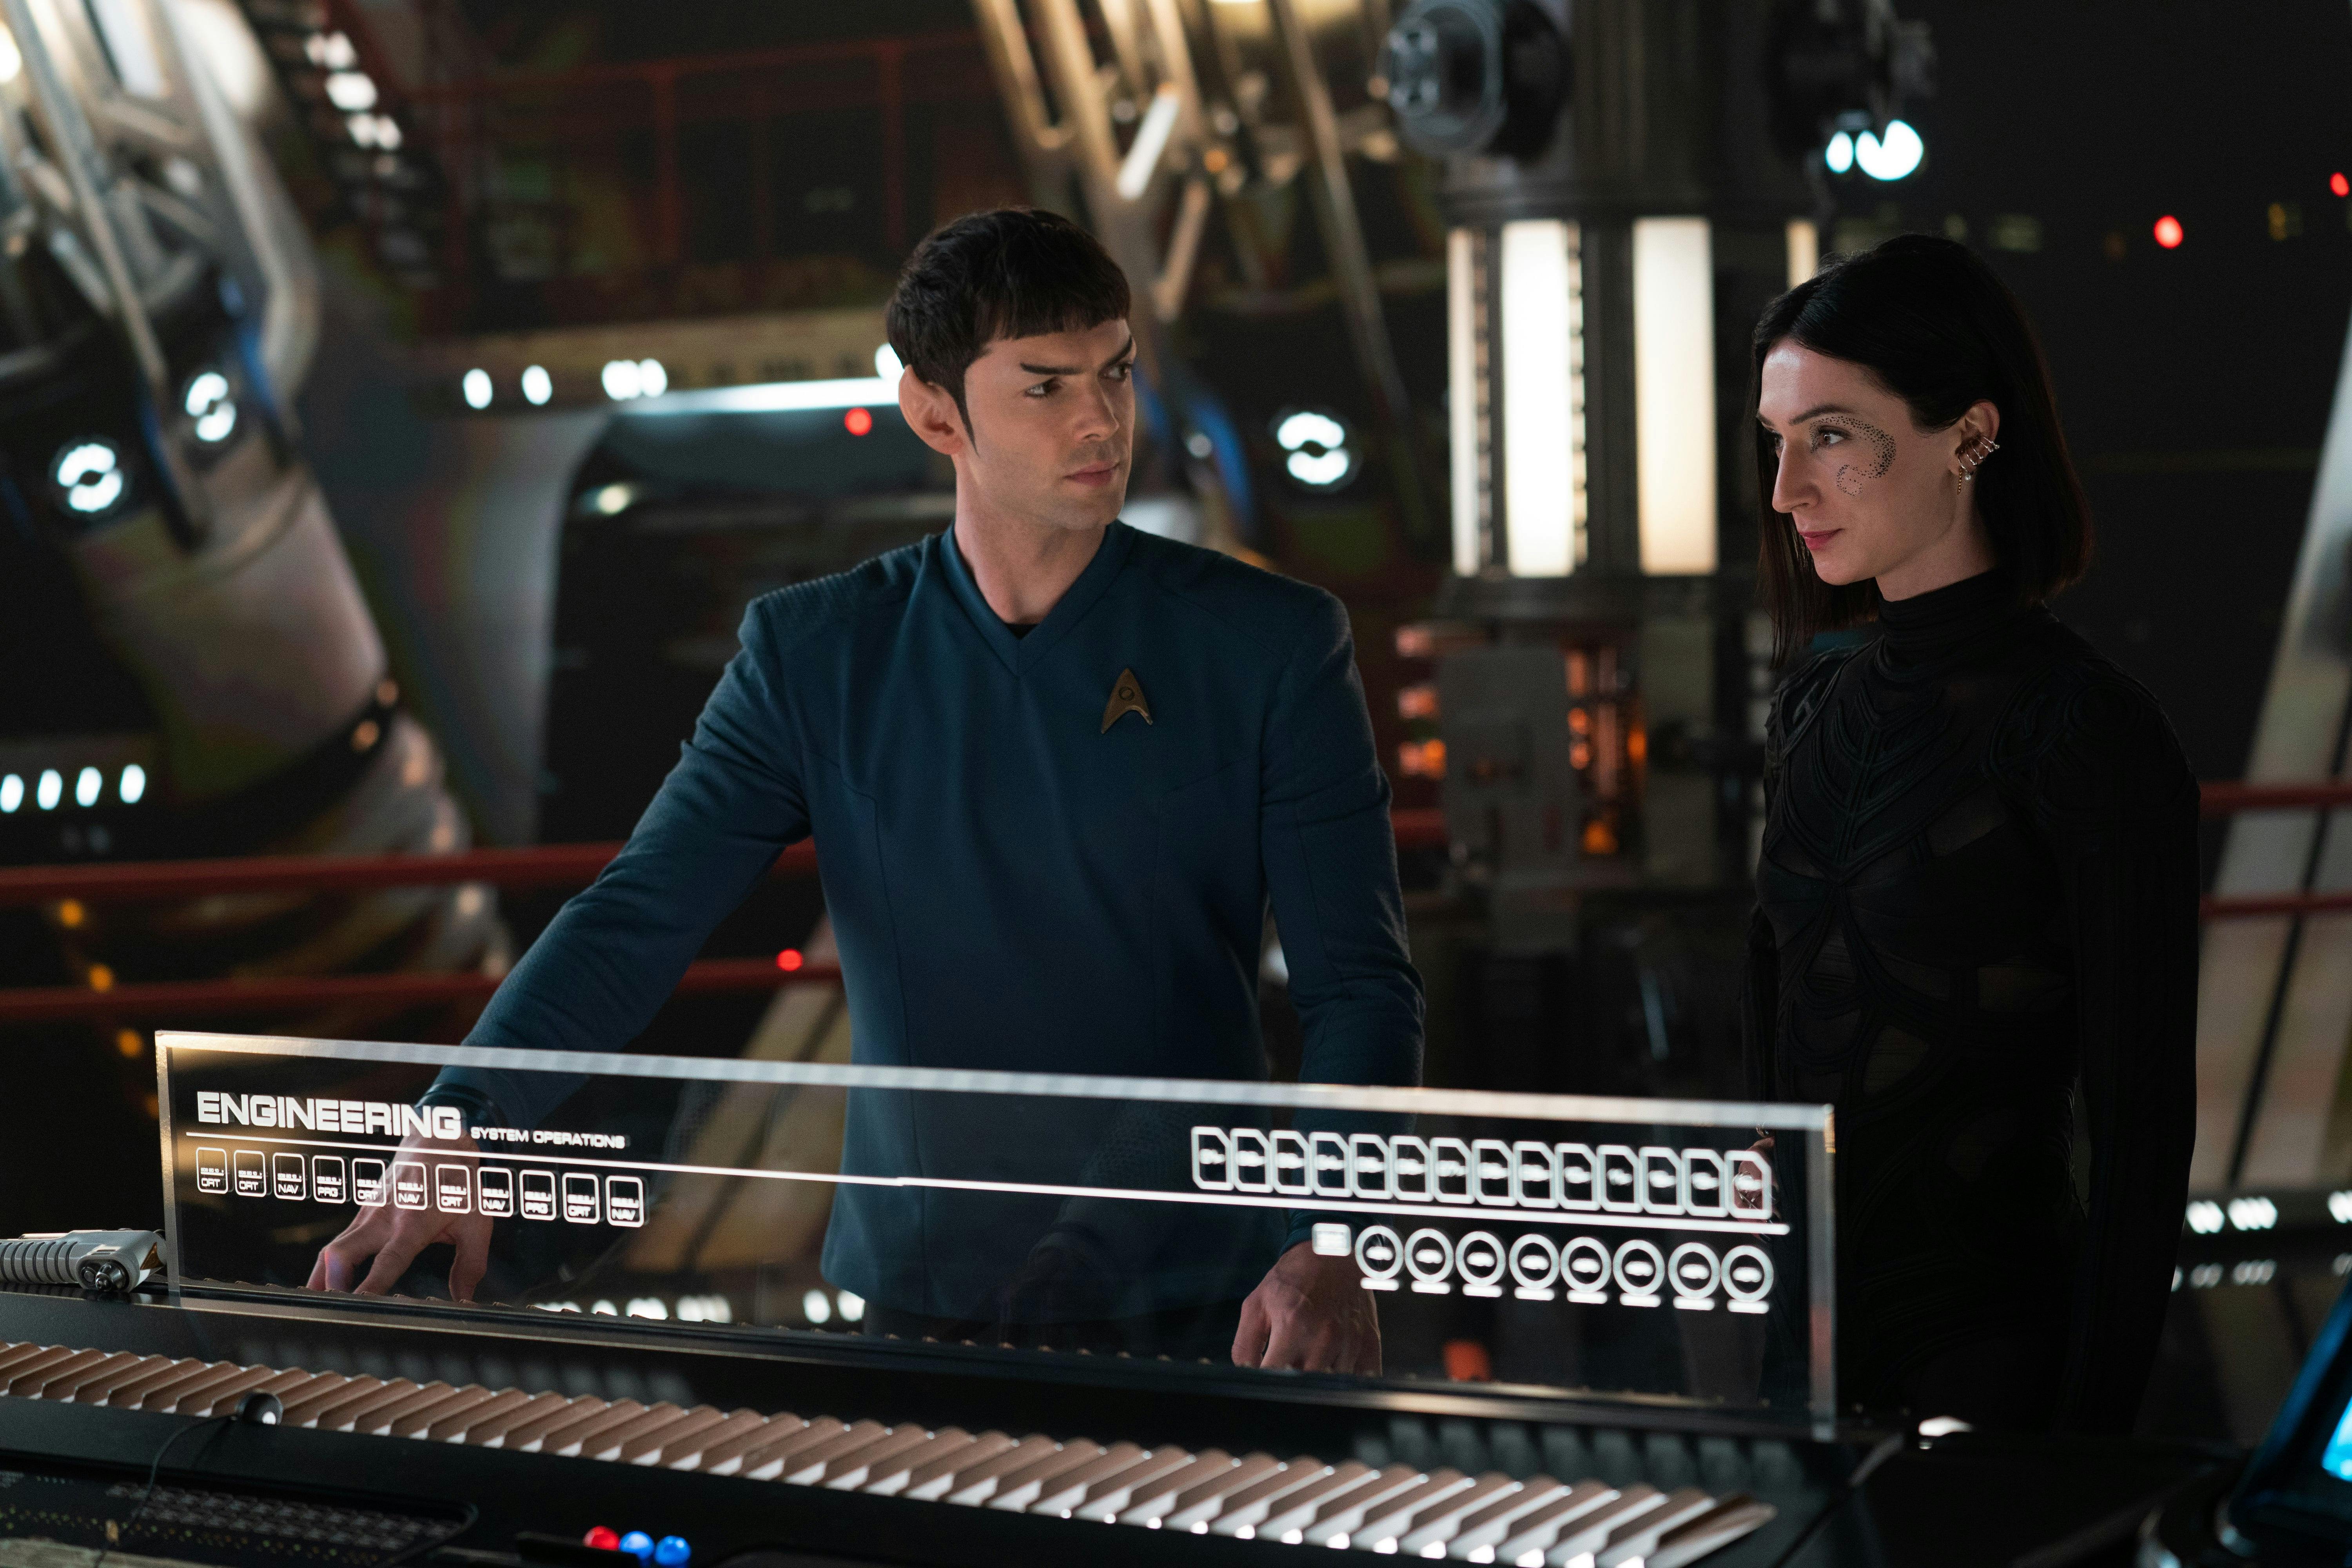 Spock (Ethan Peck) and Dr. Aspen (Jesse James Keitel) stand next to a console, looking at each other.